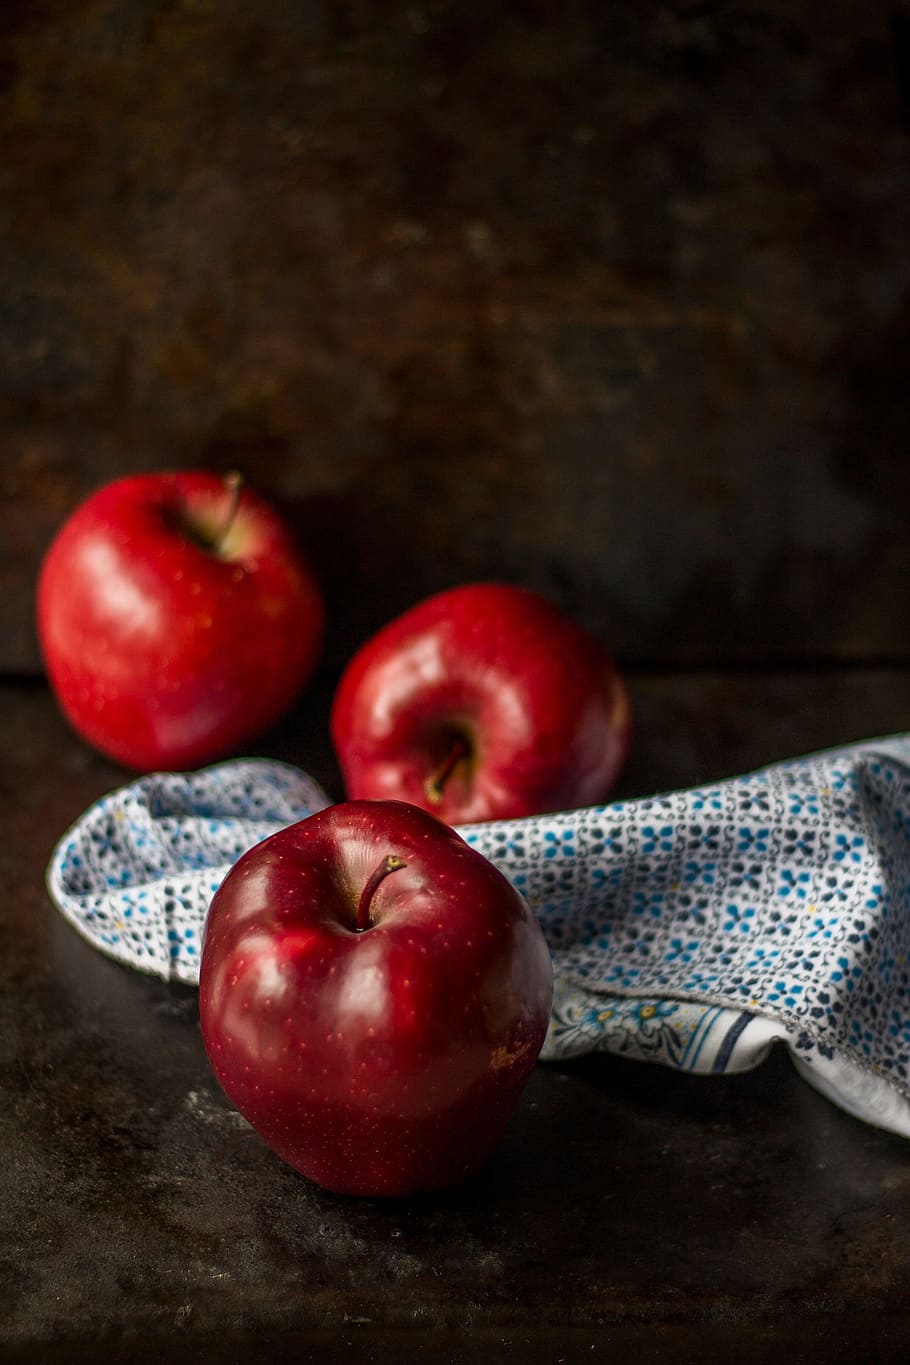 red, apple, fruit, food, juicy, healthy, cloth, healthy eating, food and drink, freshness